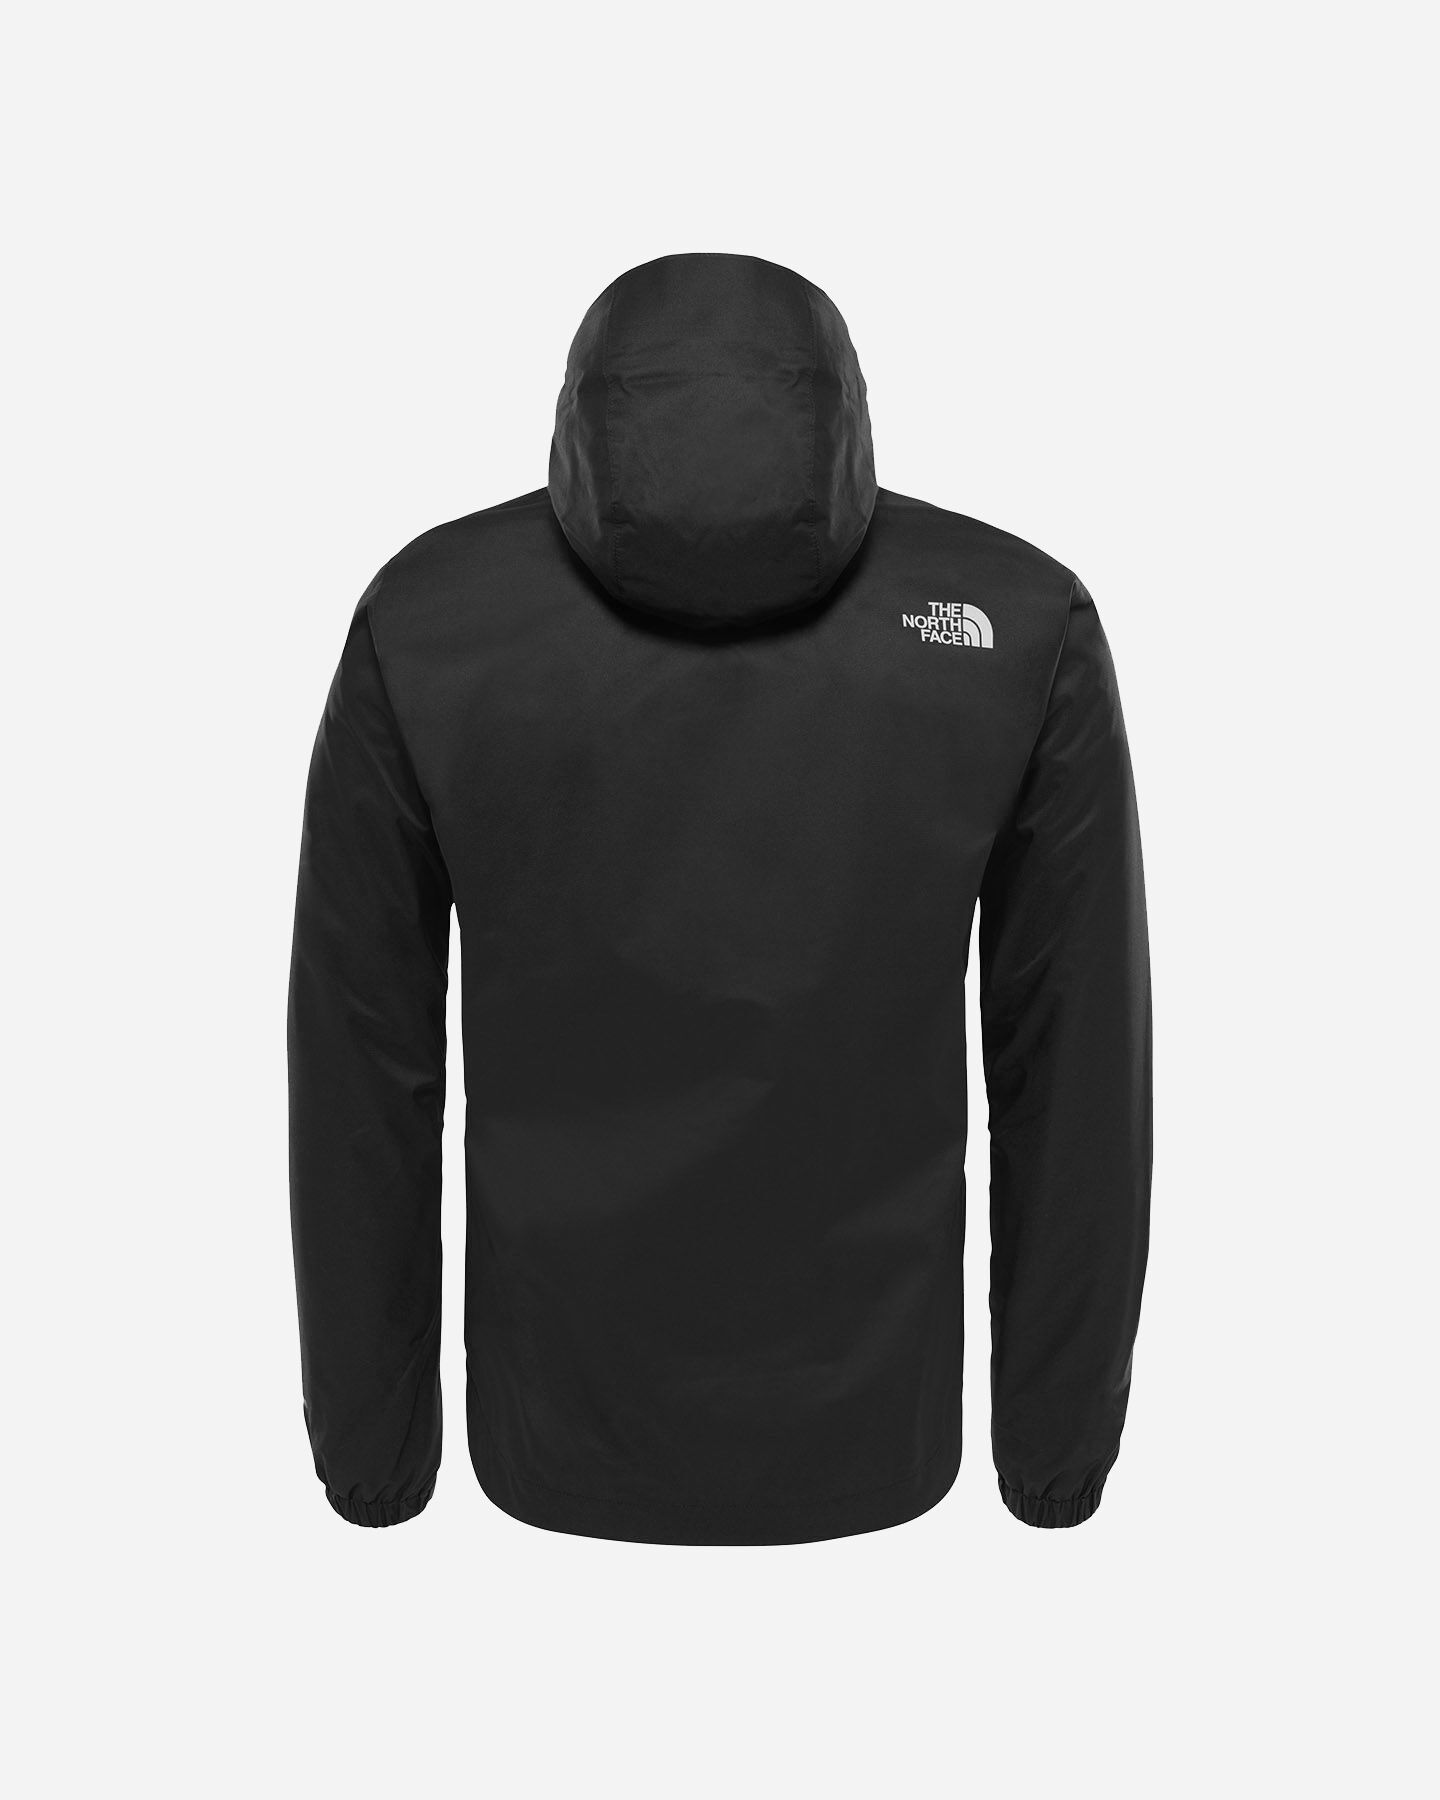  Giacca outdoor THE NORTH FACE QUEST M S1272452|JK3|XS scatto 1